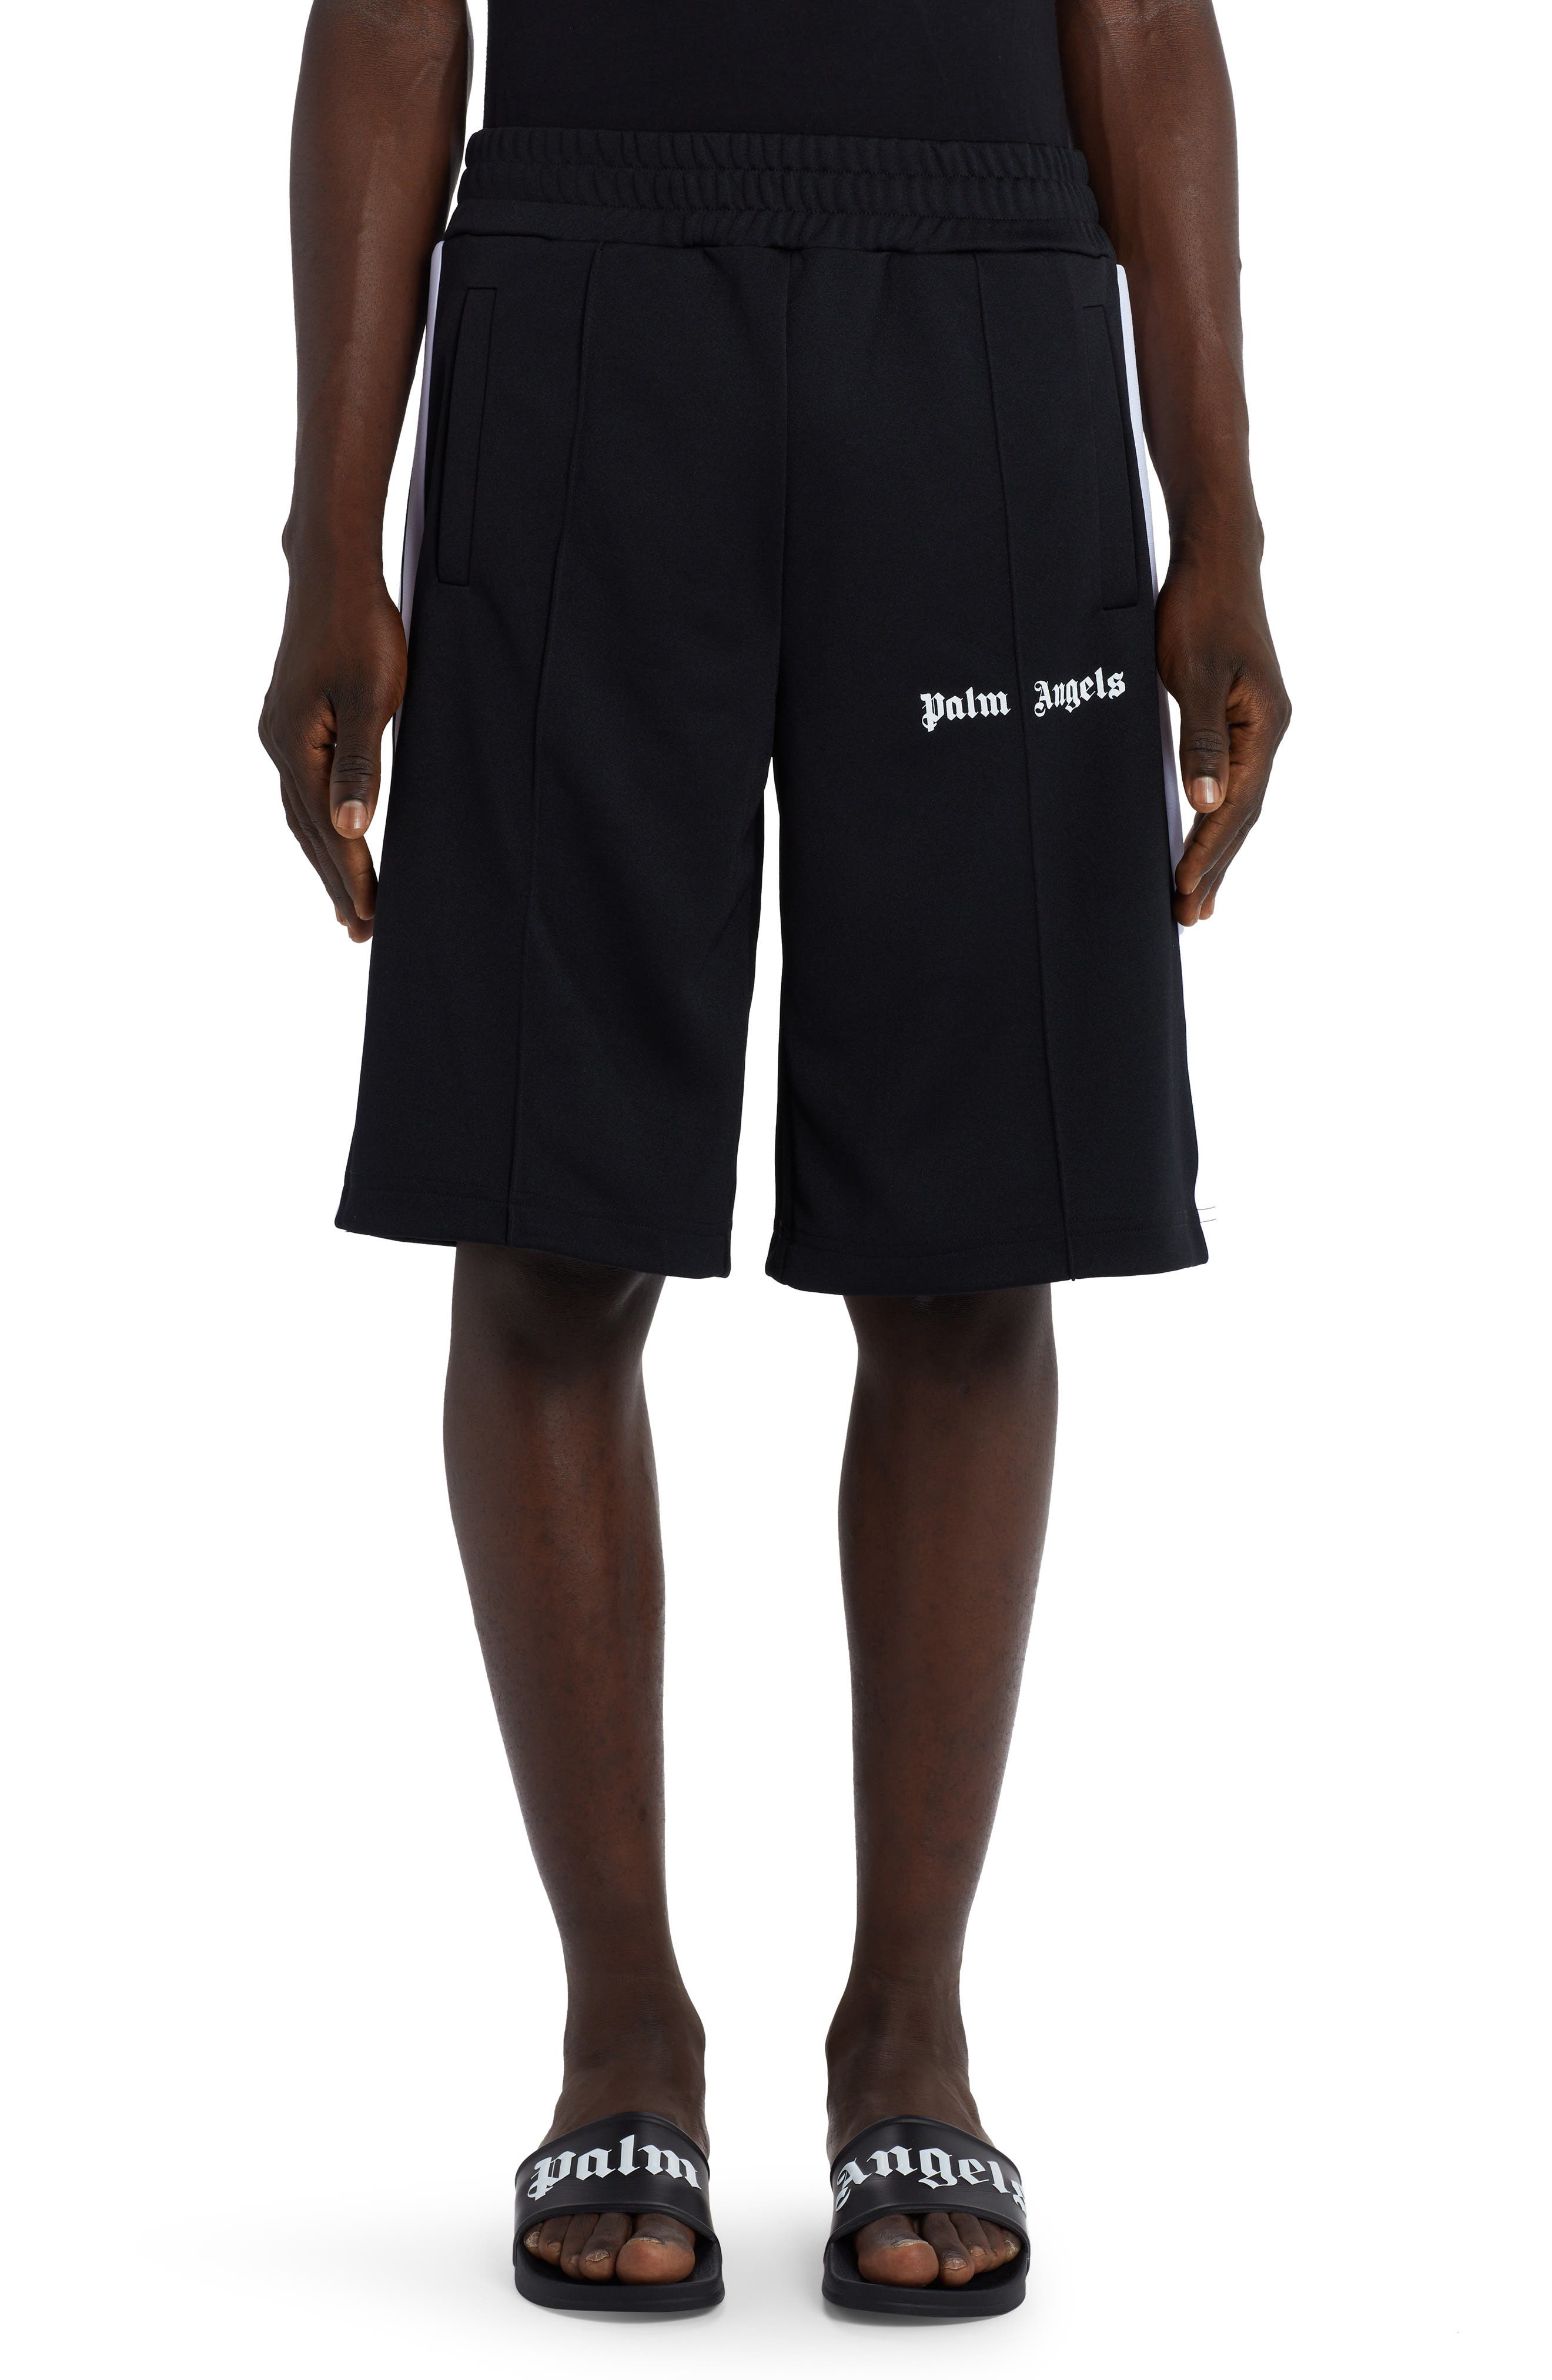 Palm Angels Classic Logo Track Shorts in Black White at Nordstrom, Size Medium